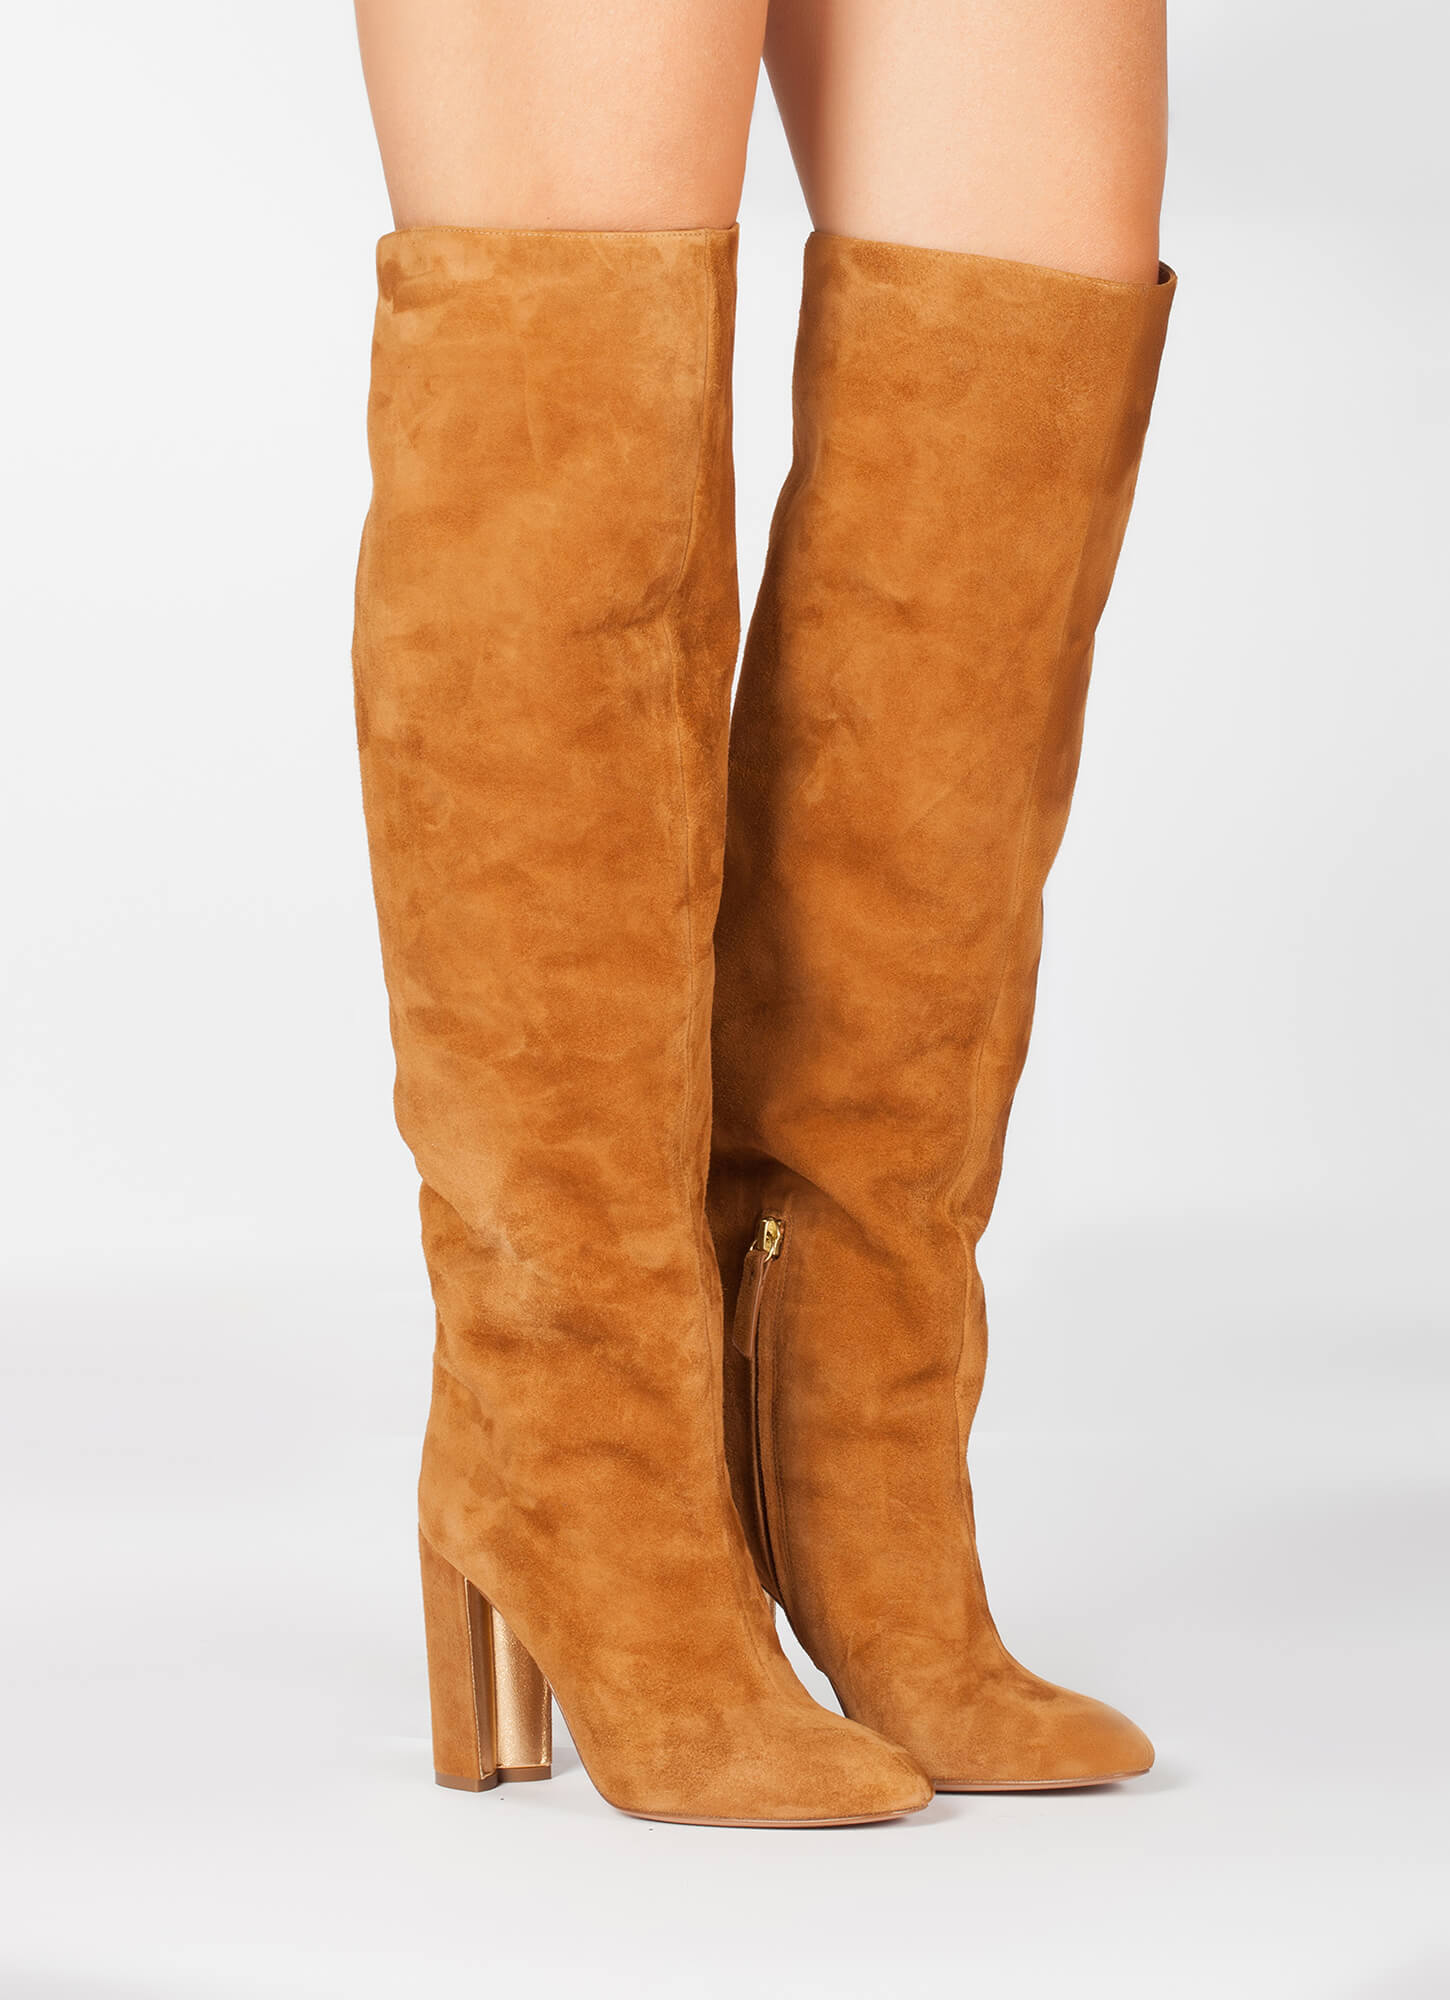 Camel suede wide high heel slouchy boots . PURA LOPEZ